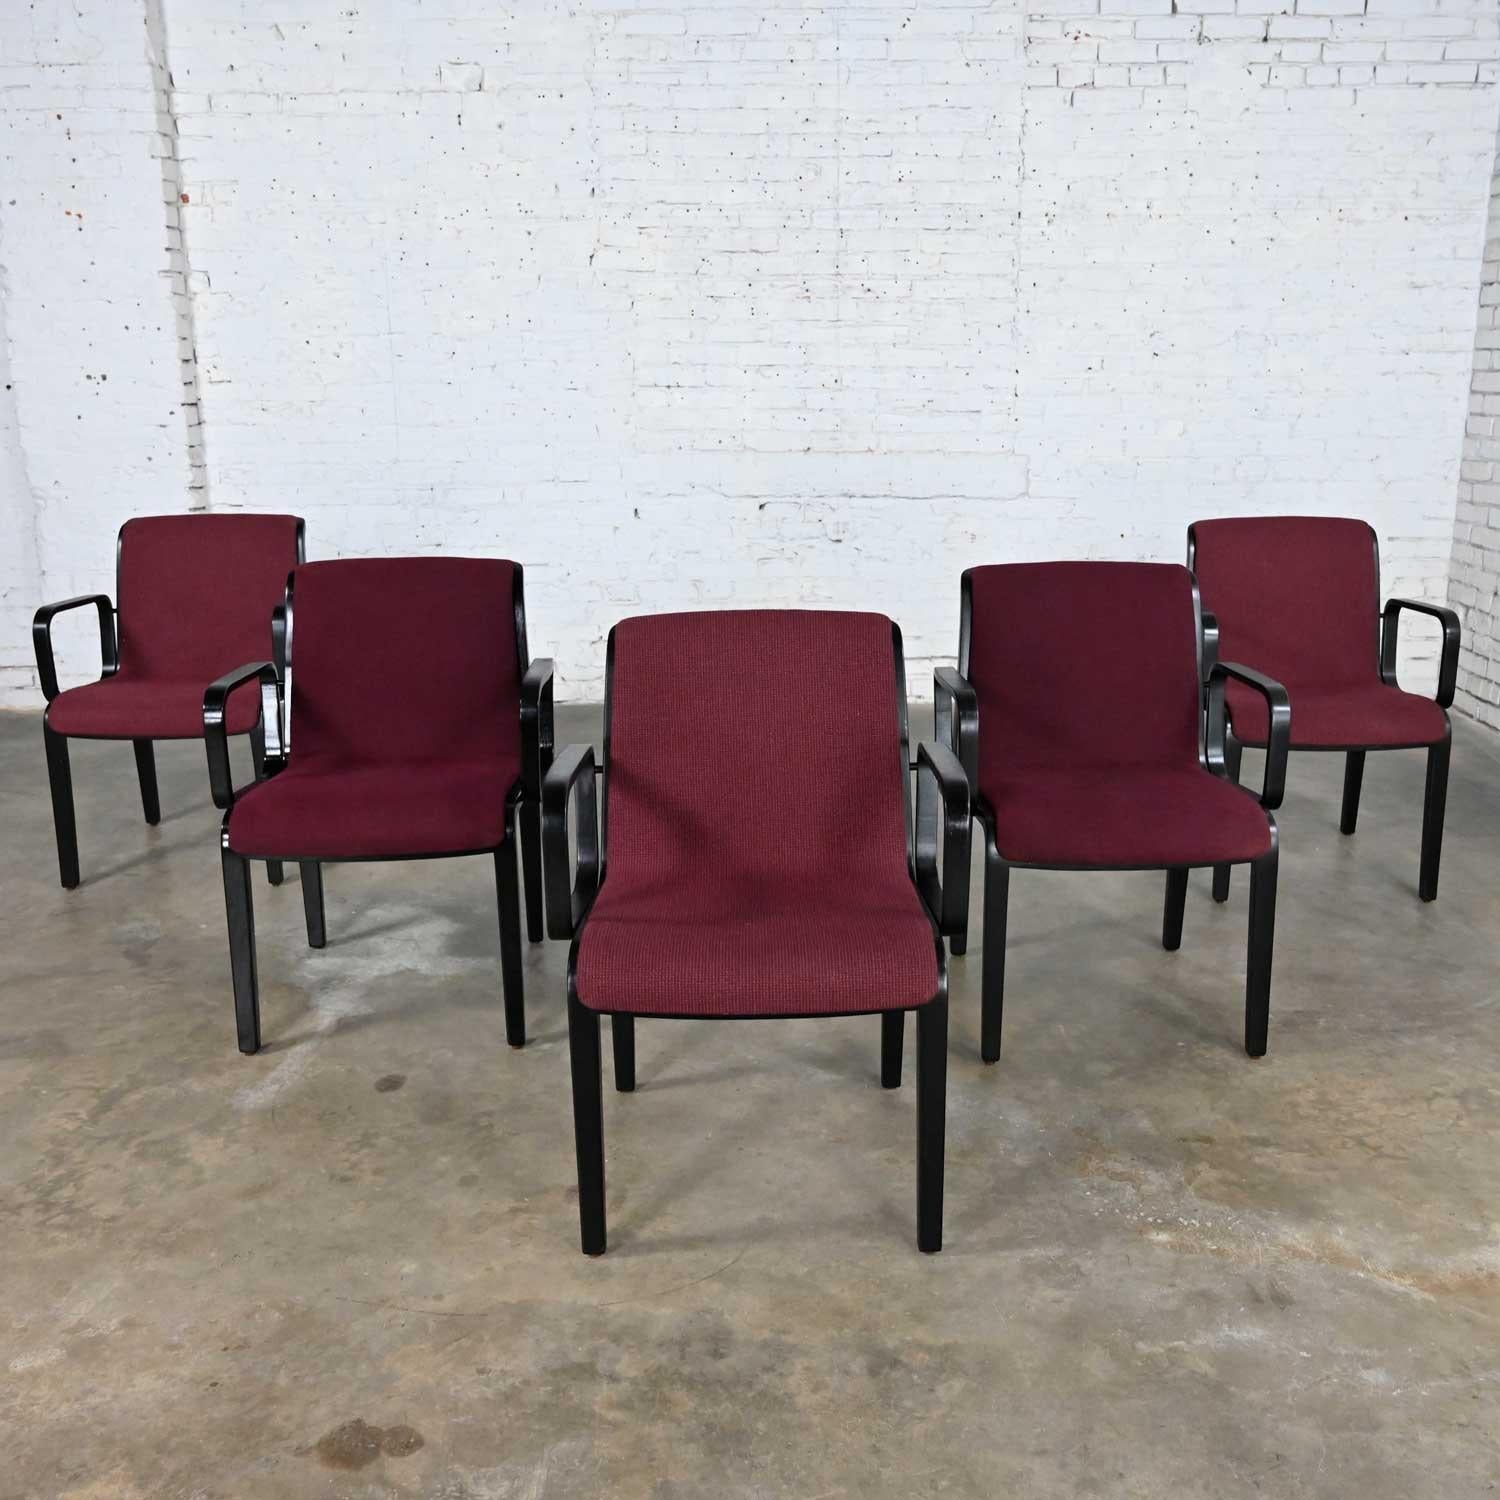 5 Knoll MCM Bentwood 1300 Series Dining Chairs Maroon & Black by Bill Stephens For Sale 6